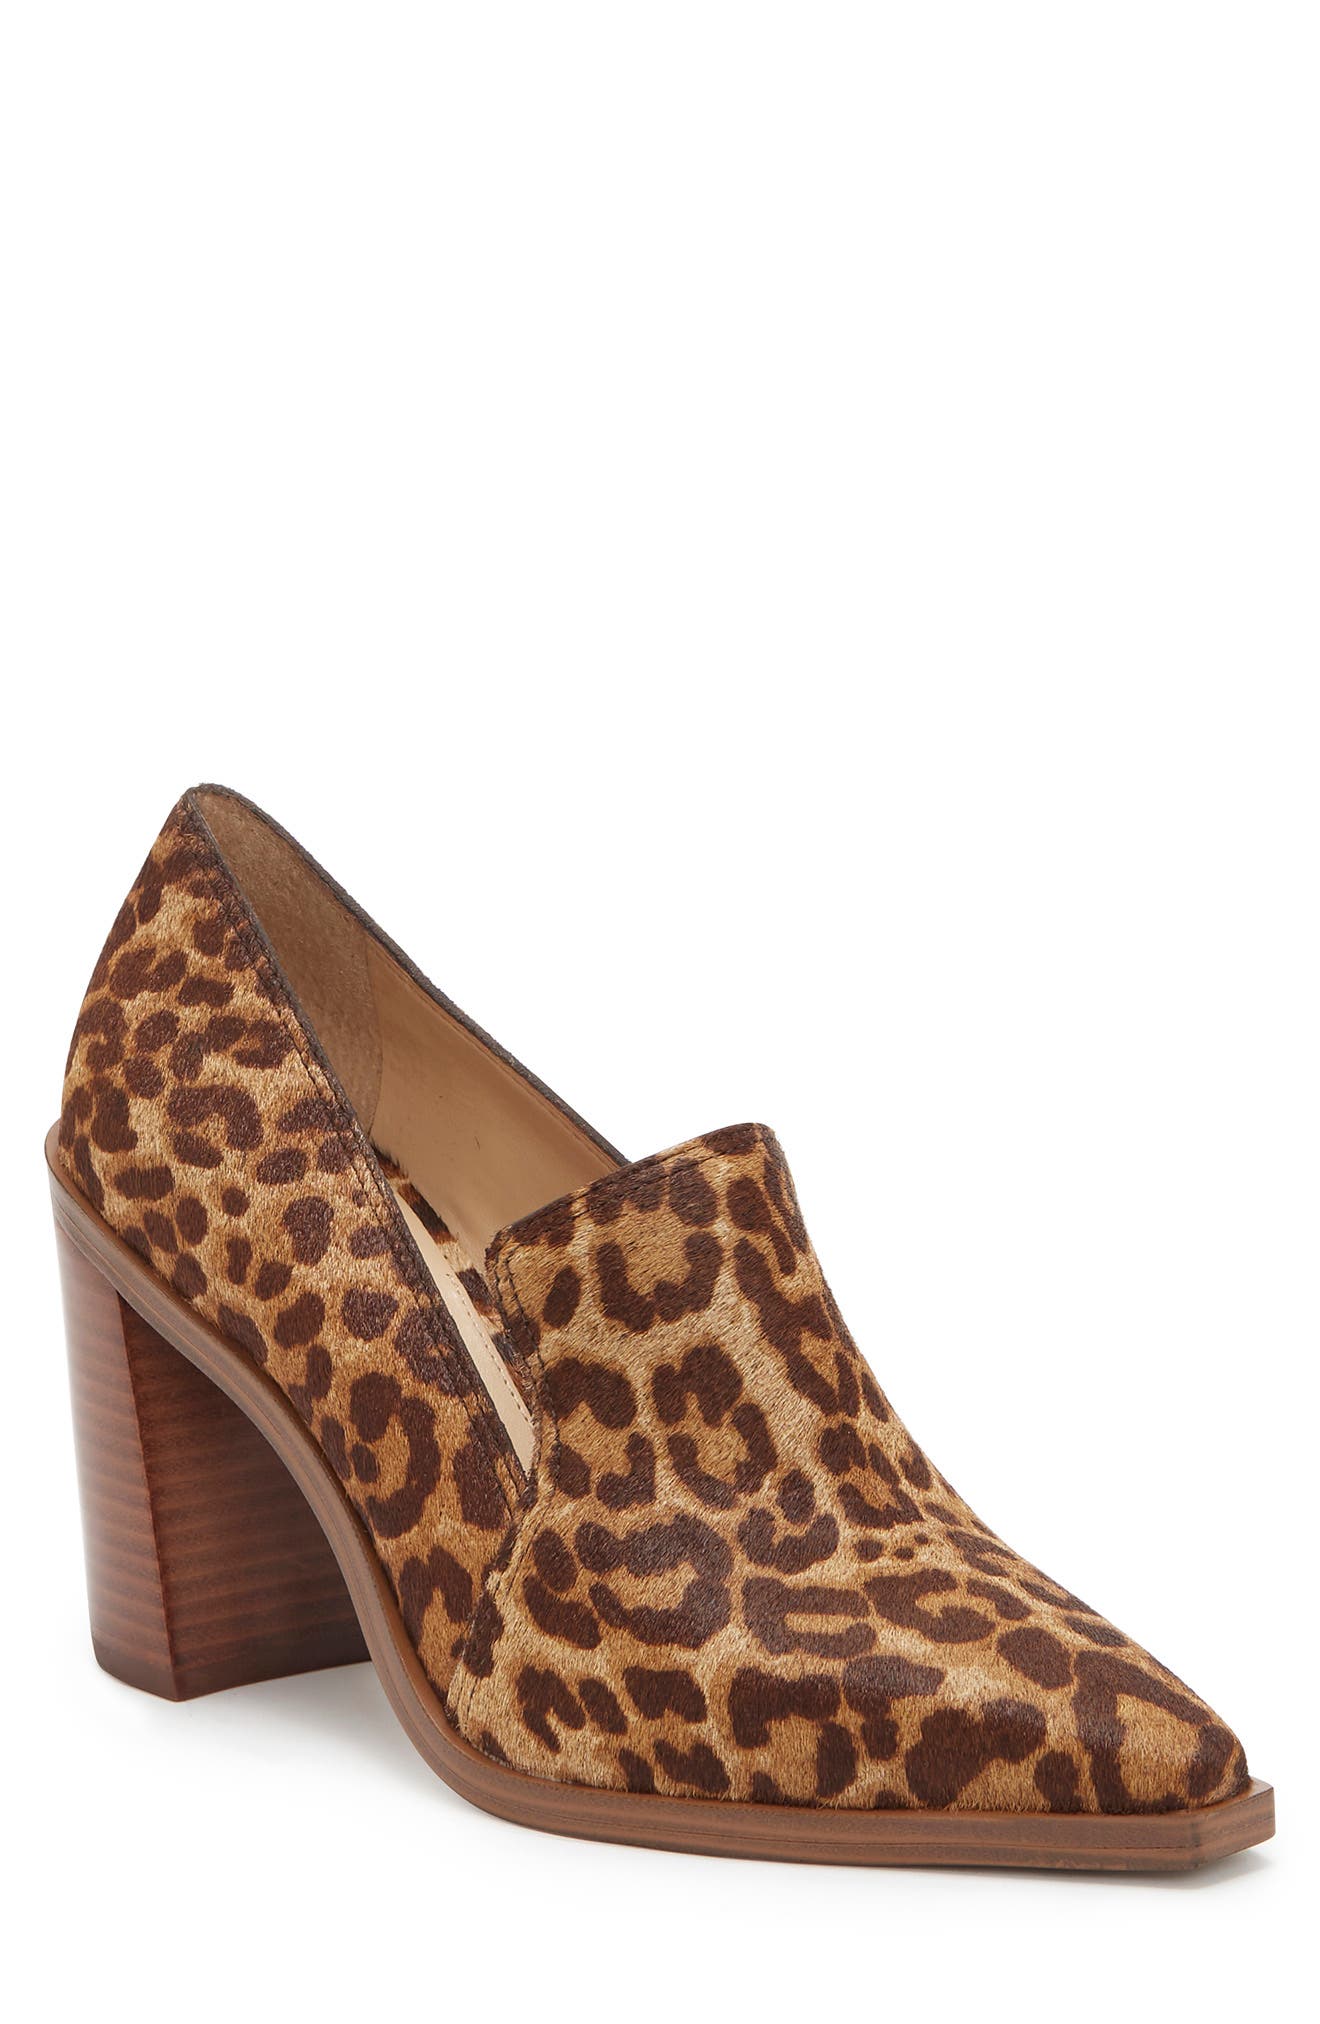 UPC 191707314085 product image for Vince Camuto Genuine Calf Hair Wevenly Pump in Caramel at Nordstrom, Size 5 | upcitemdb.com